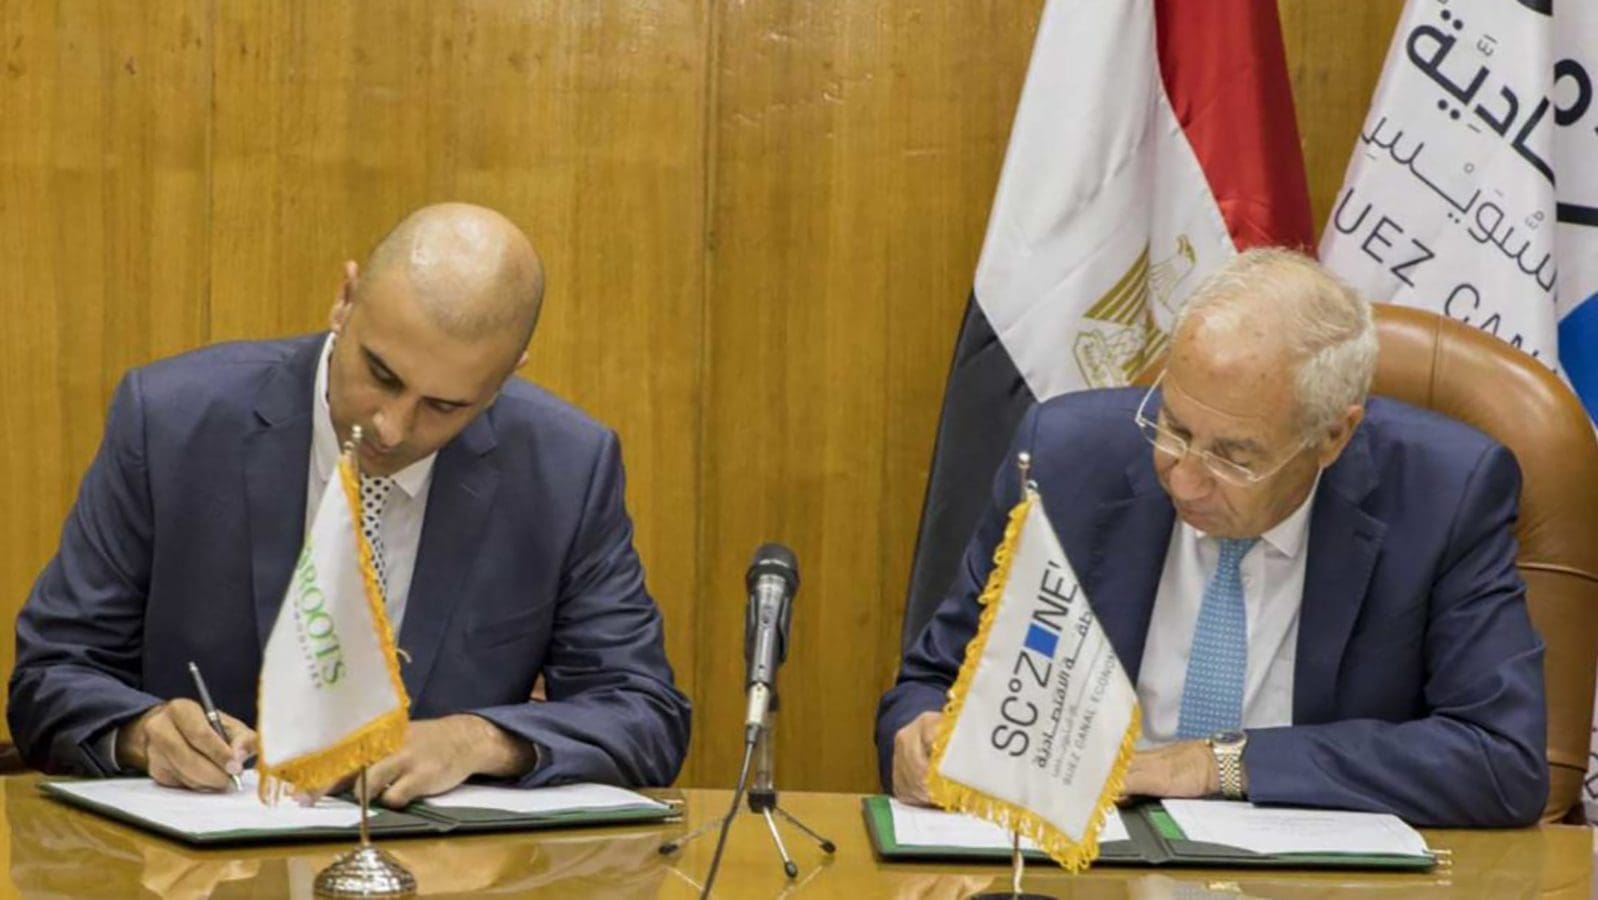 Commodity trading giants Roots Commodities, Rosa Grain to build US$140 million grain terminal in Egypt